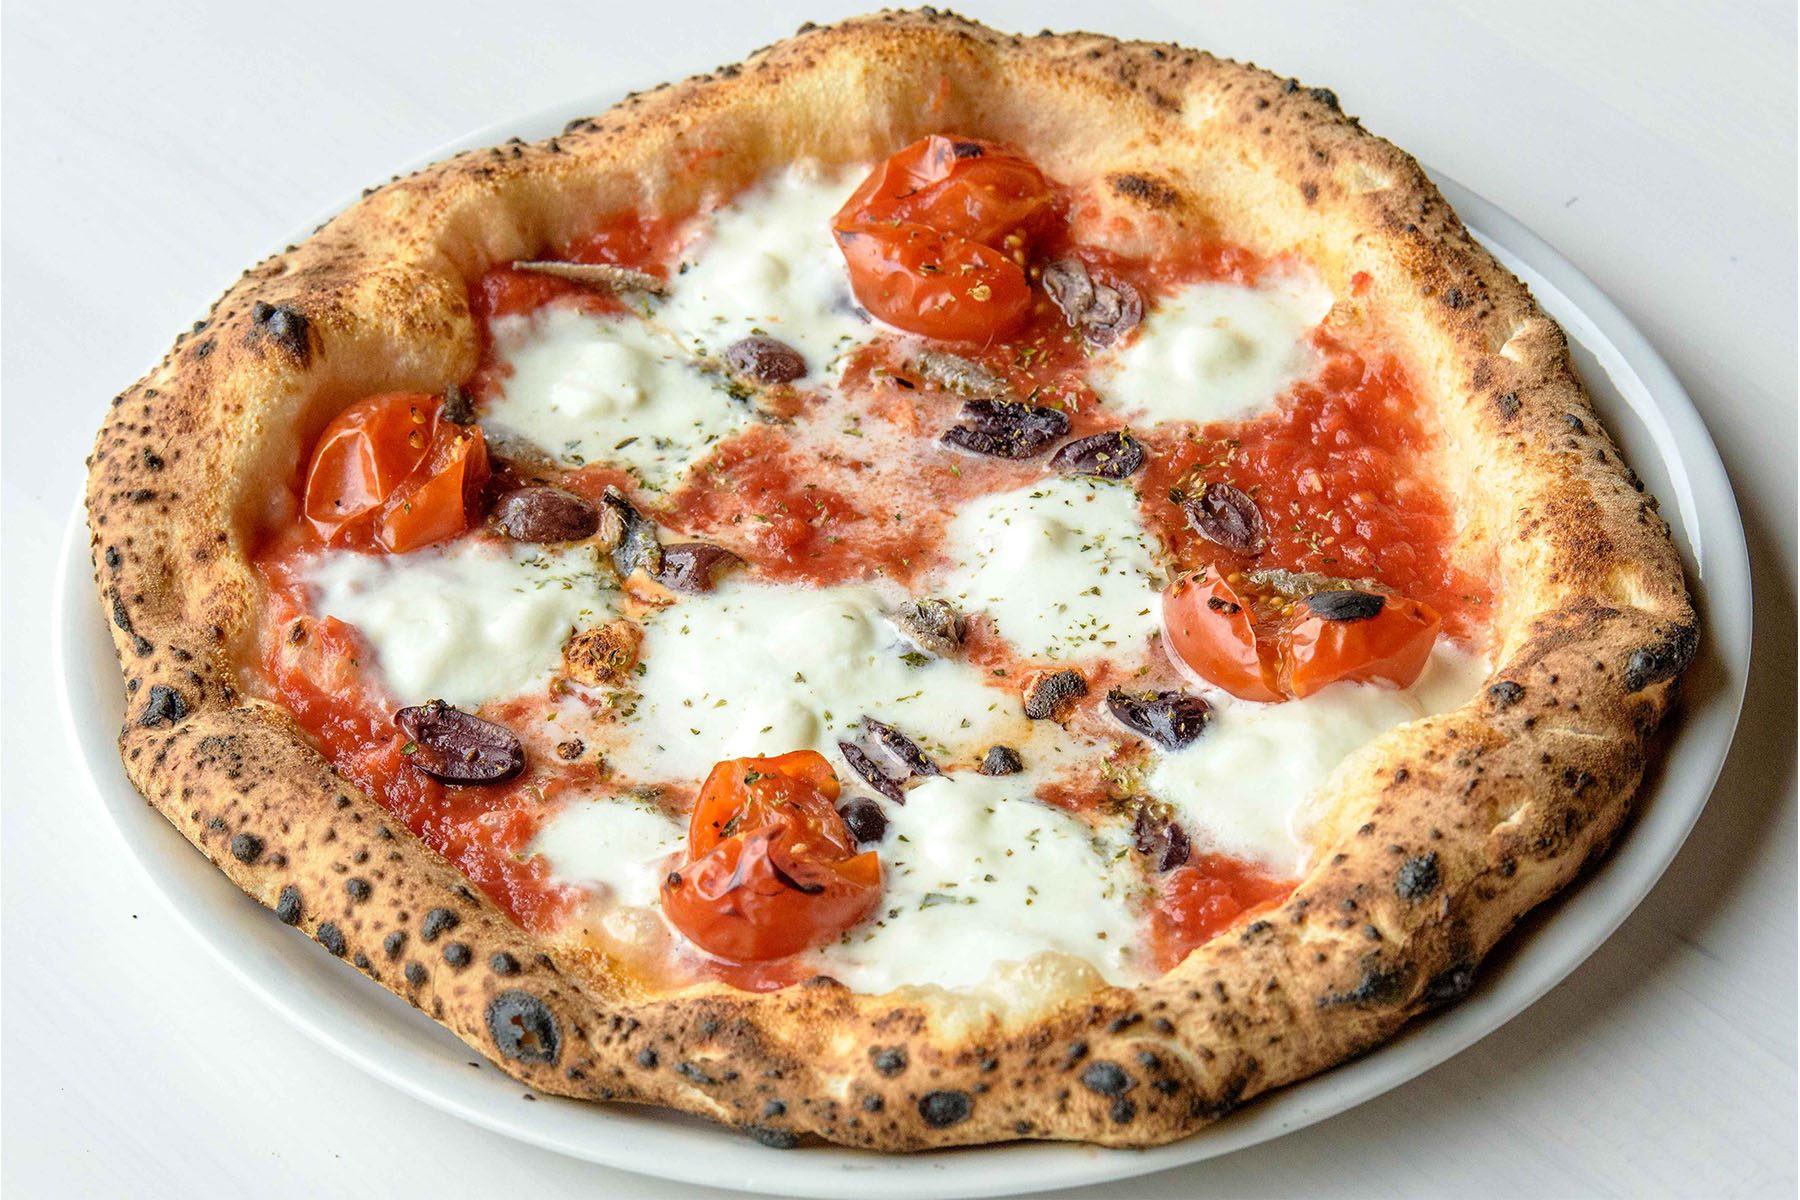 Forno Rosso is one of the most famous chicago pizza Neapolitan style